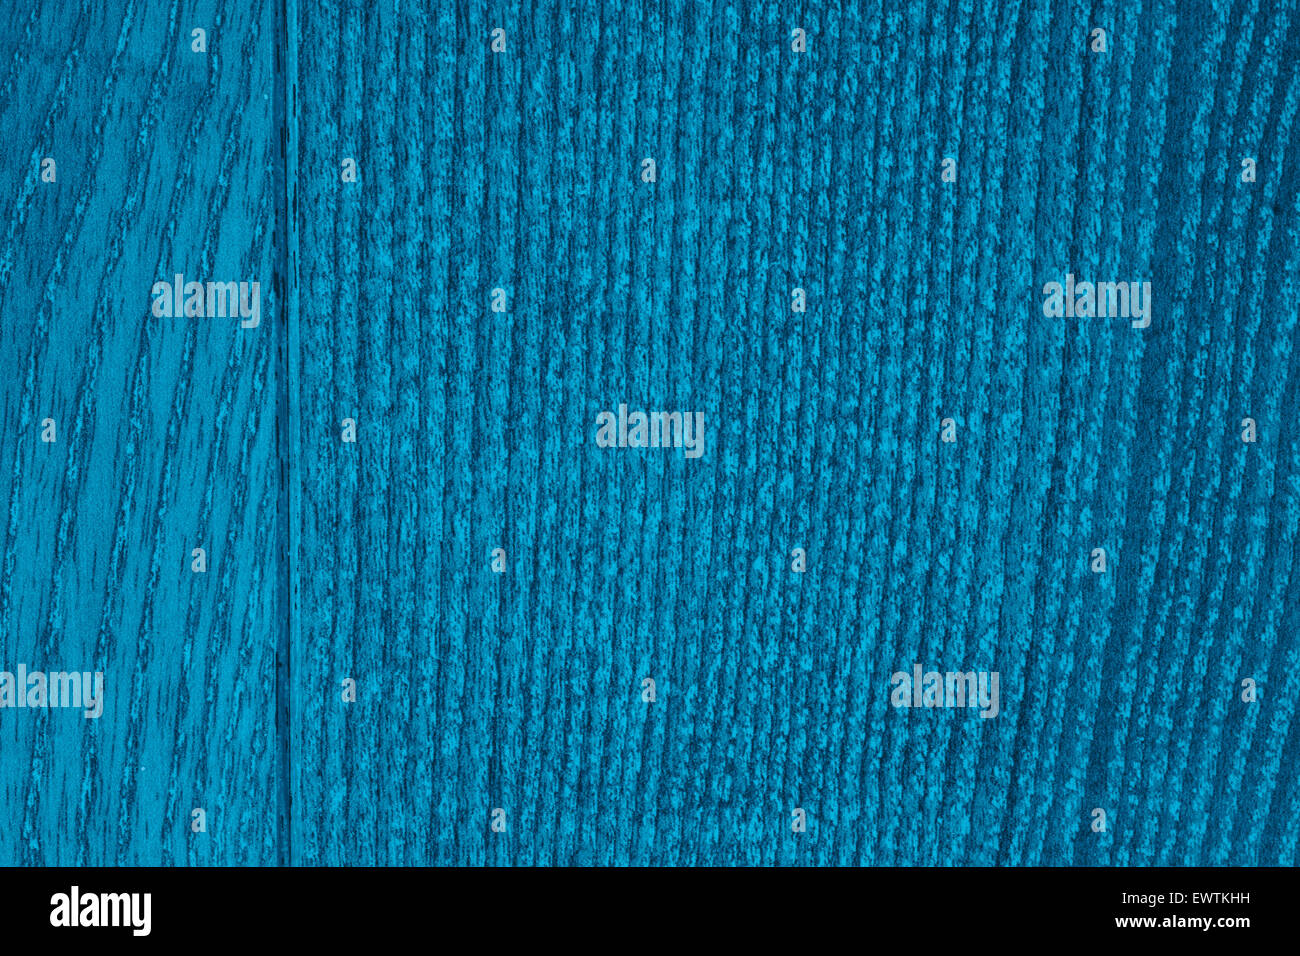 wood grain texture or oak plank turquoise background with margin Stock Photo